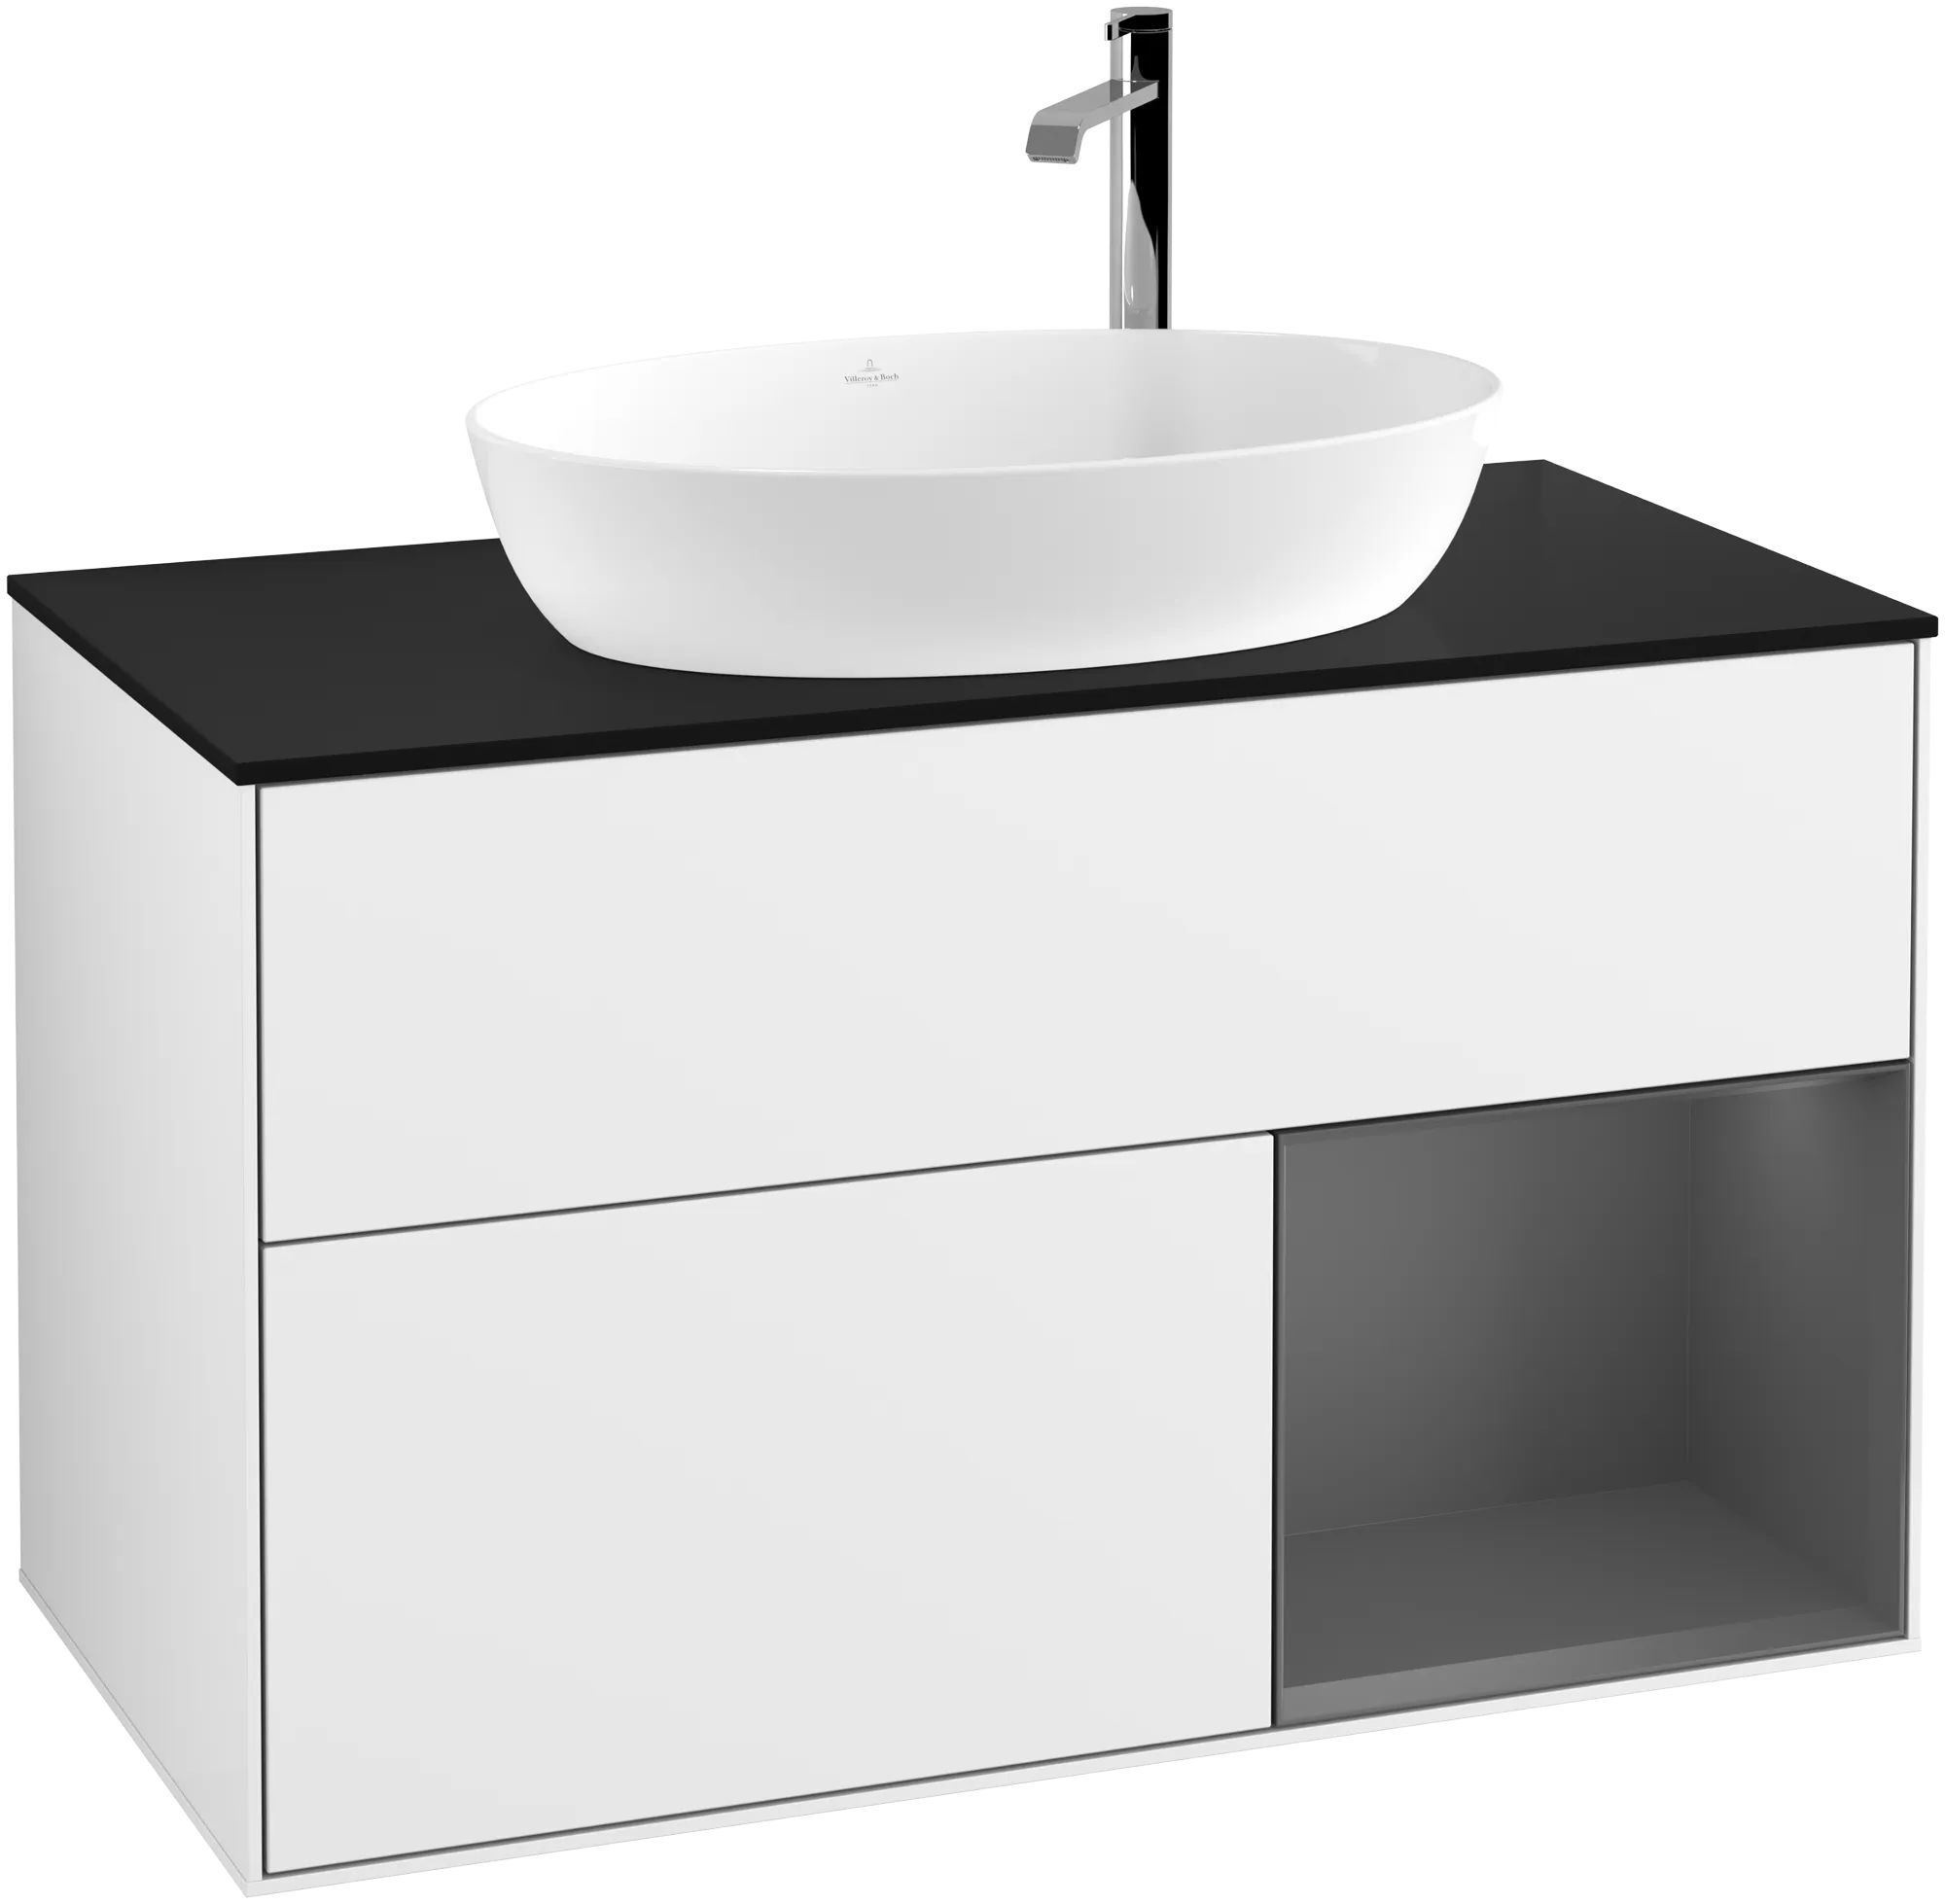 Зображення з  VILLEROY BOCH Finion Vanity unit, with lighting, 2 pull-out compartments, 1000 x 603 x 501 mm, Glossy White Lacquer / Anthracite Matt Lacquer / Glass Black Matt #G902GKGF